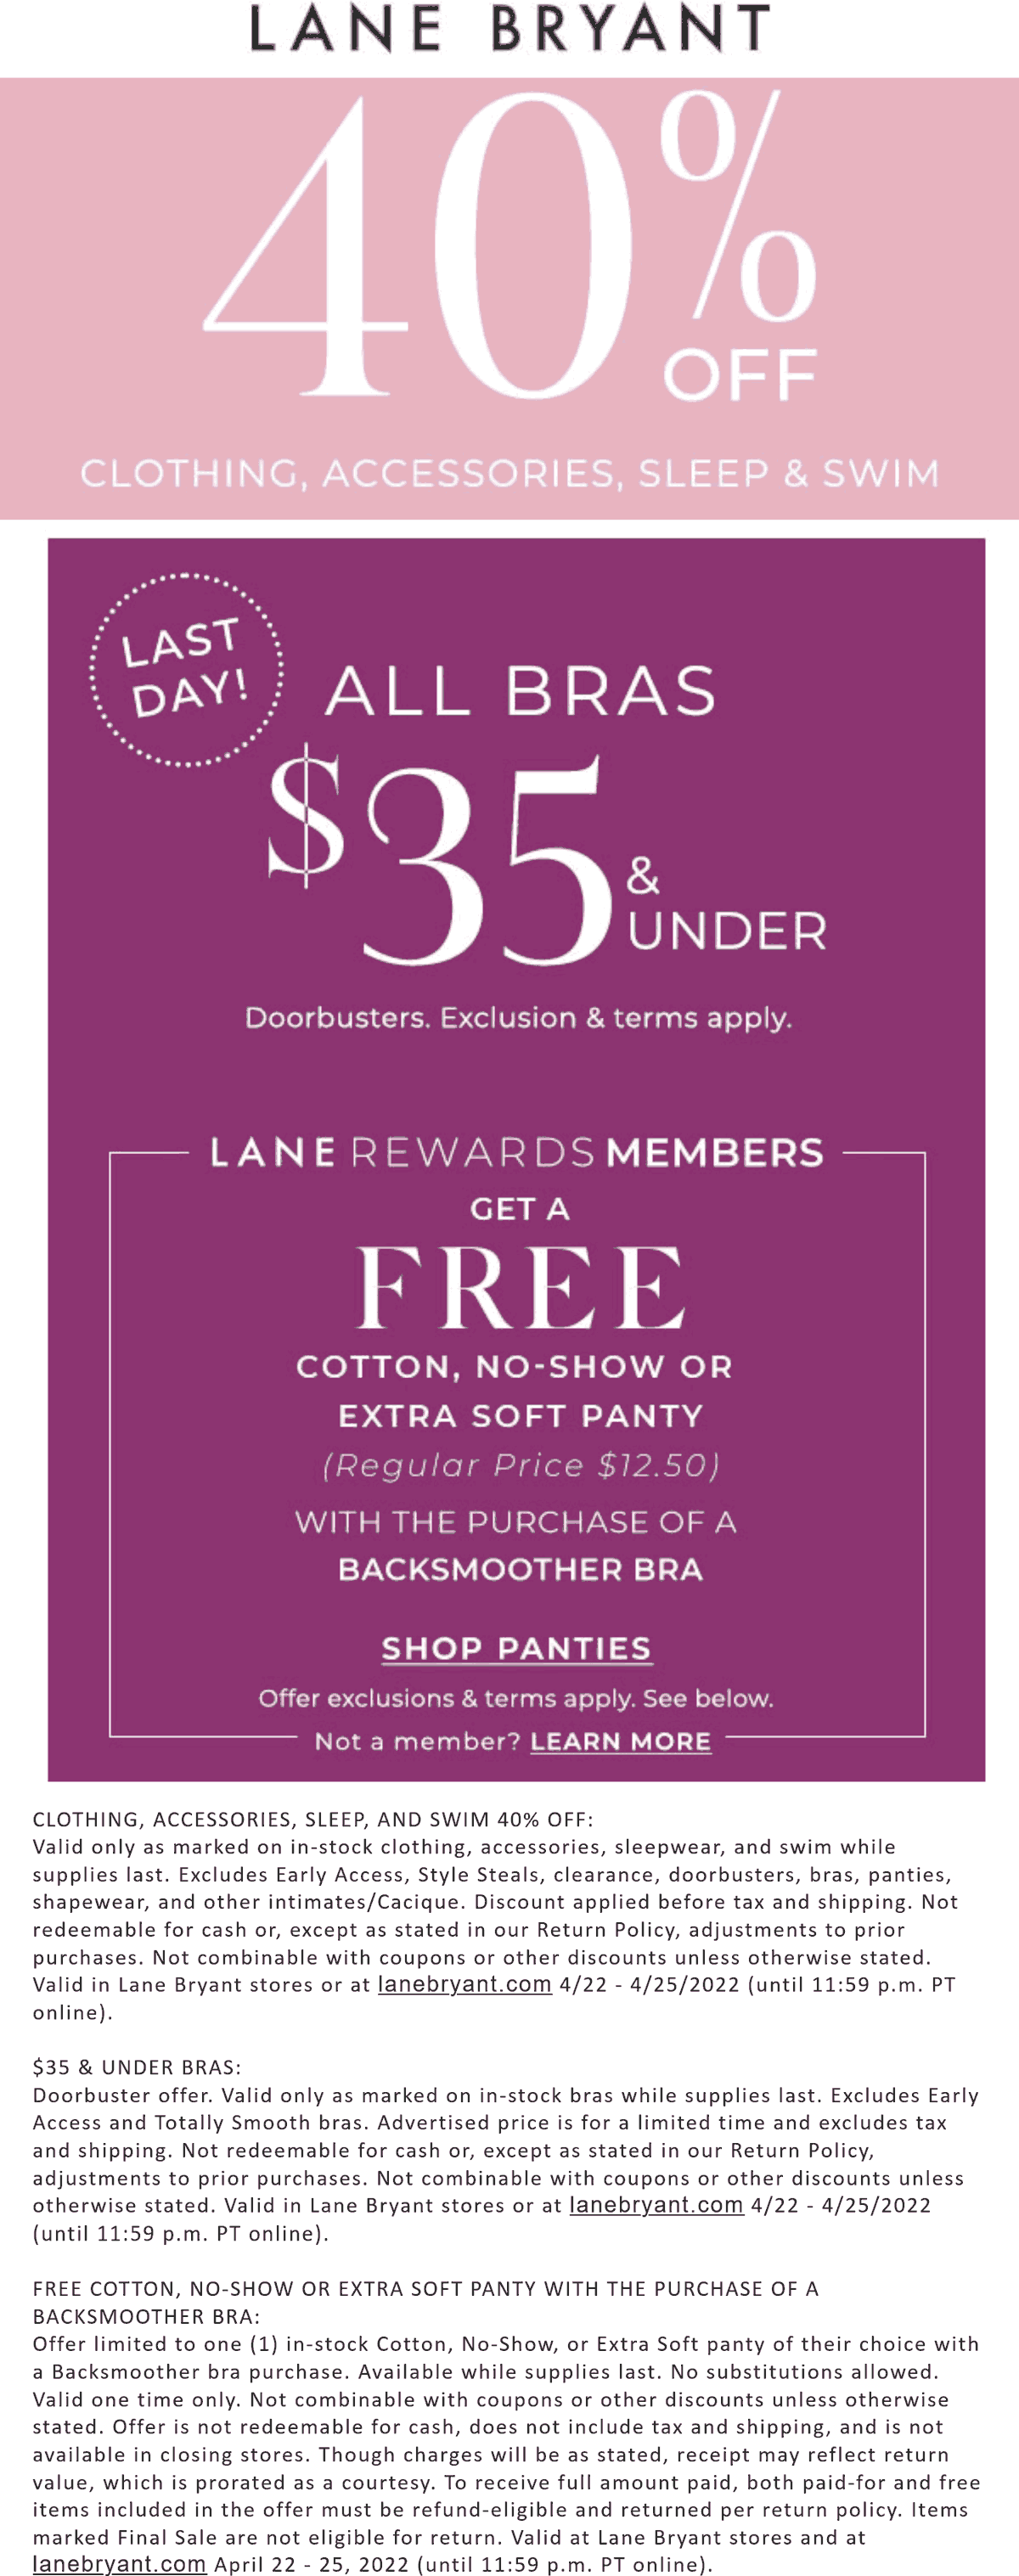 Lane Bryant stores Coupon  40% off today at Lane Bryant, ditto online #lanebryant 